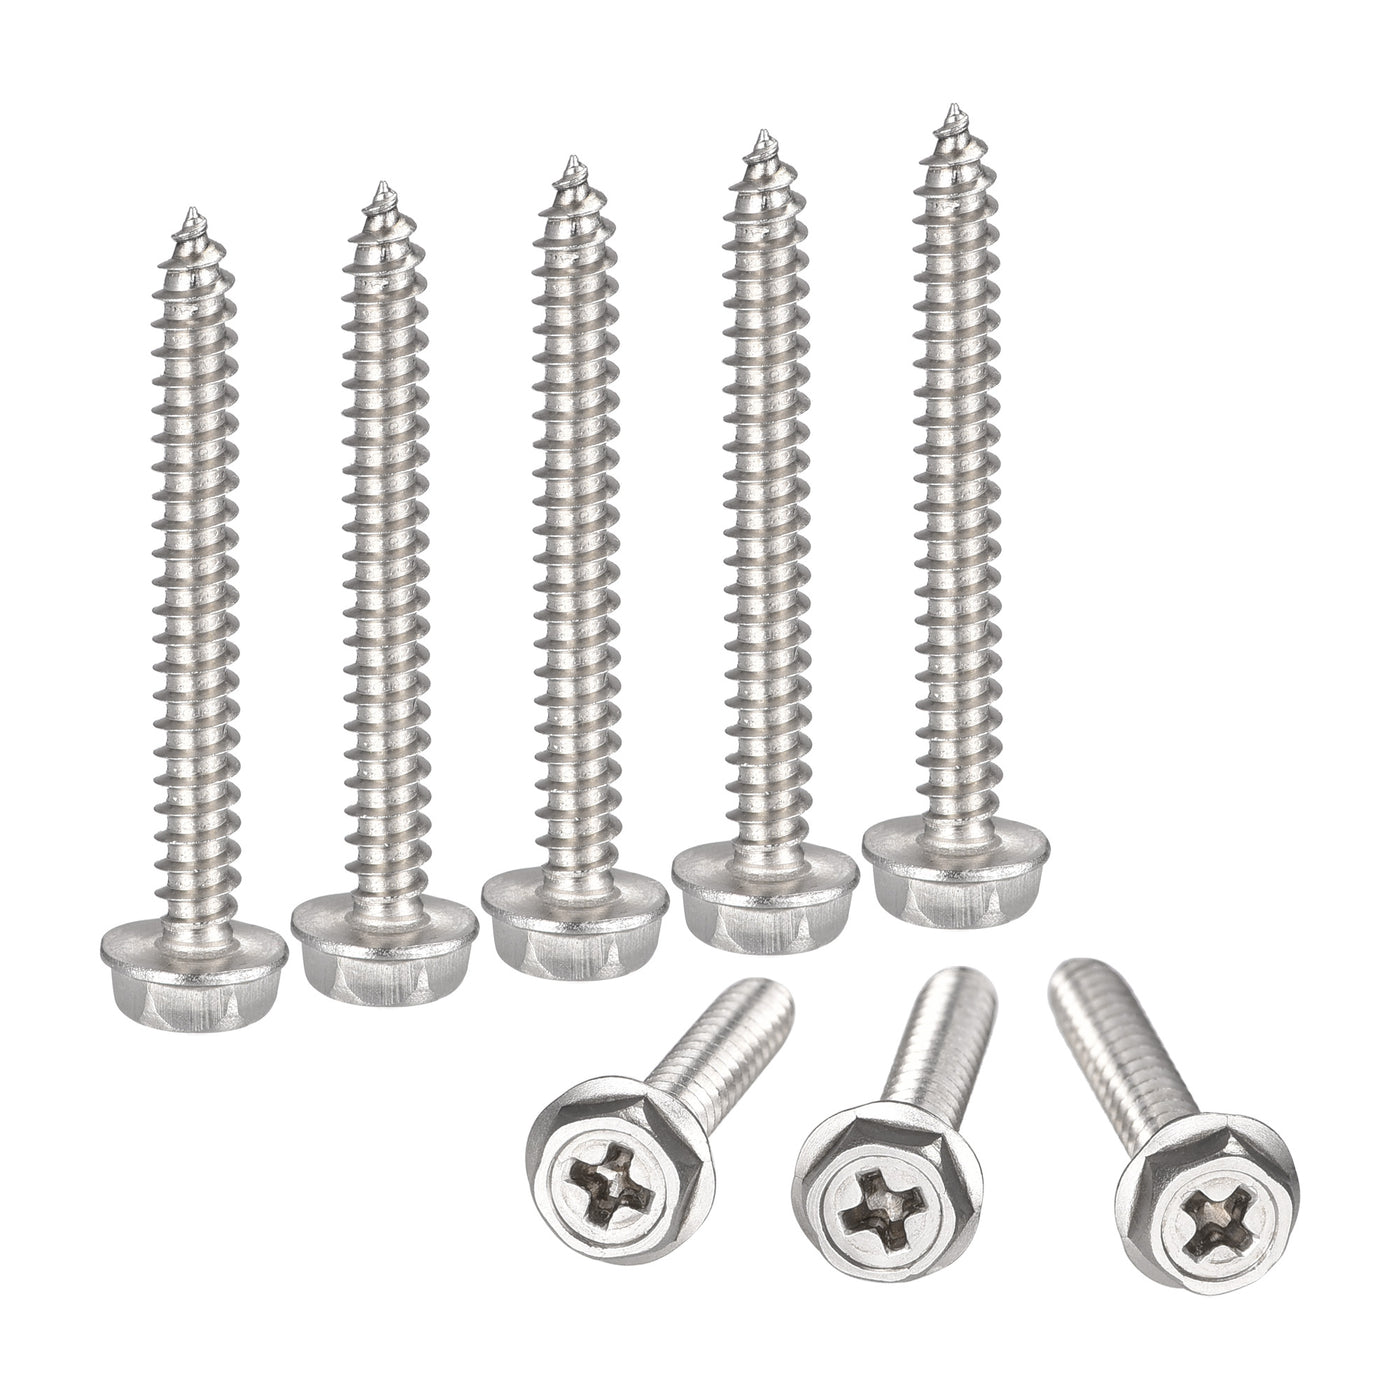 uxcell Uxcell Phillips Hex Washer Self Tapping Screws, M4 x 35mm 304 Stainless Steel Hex Flange Sheet Metal Screw 25pcs